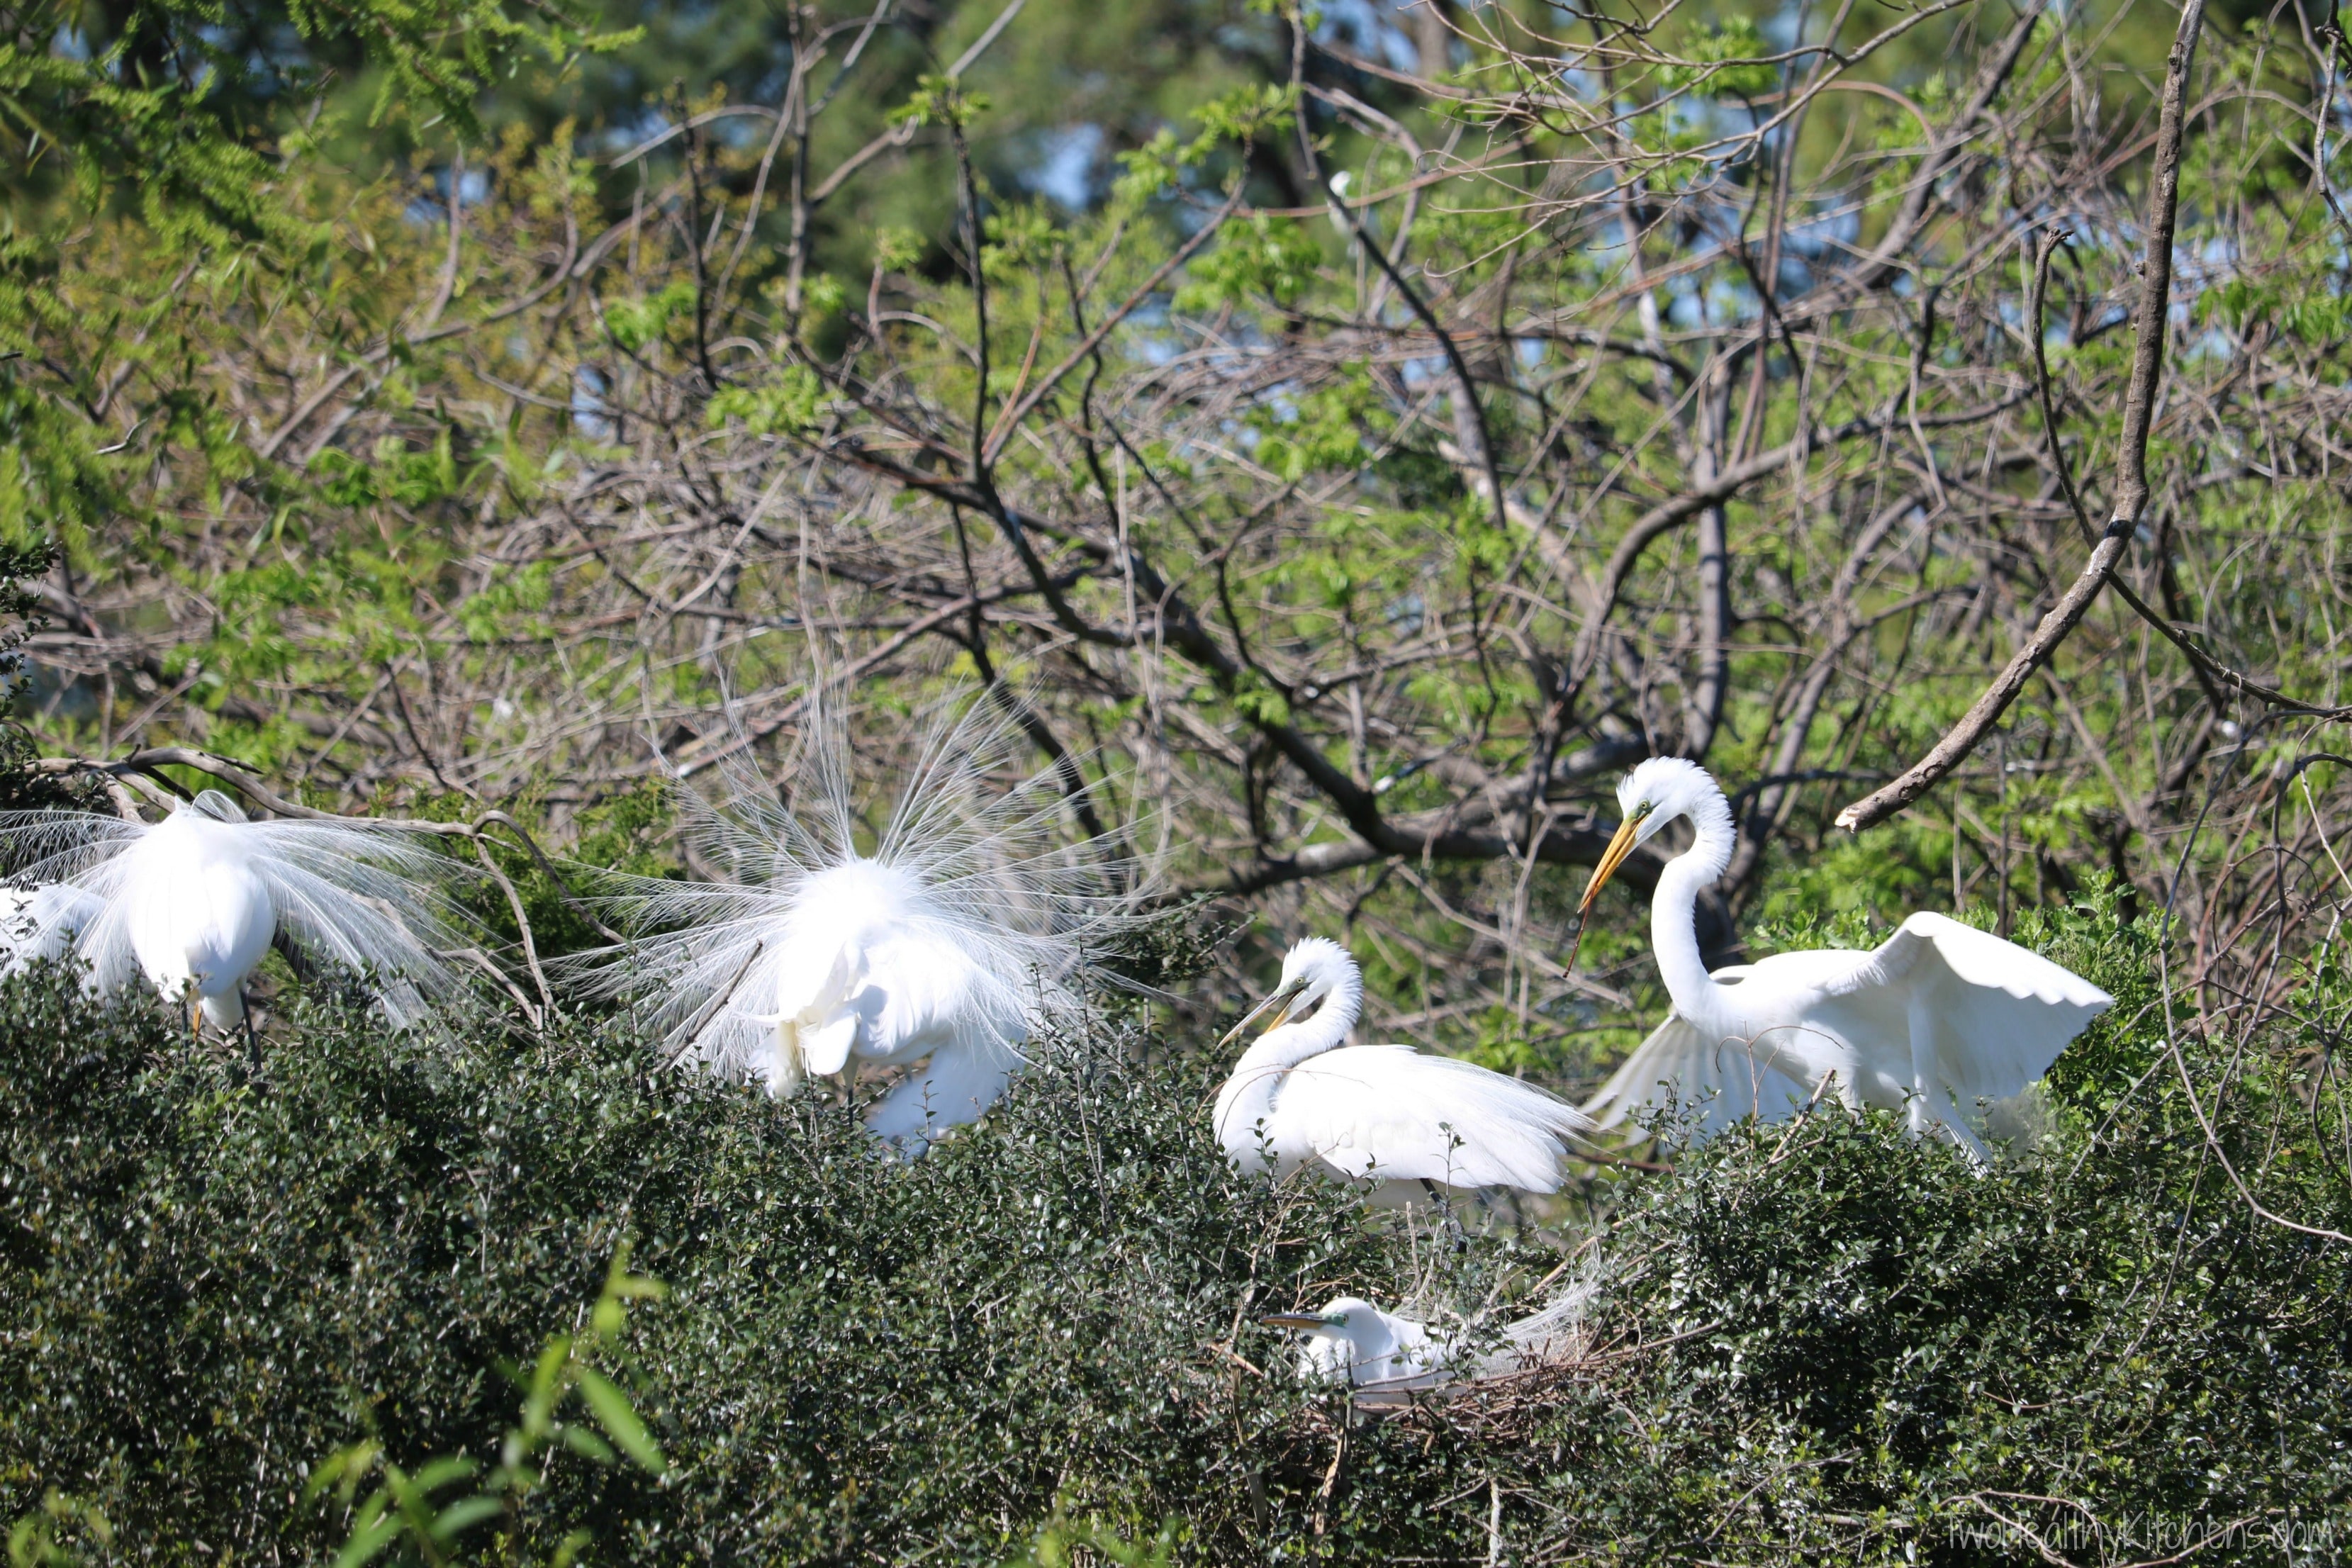 White birds roosting in trees at Hilton Head's Pinckney Island.